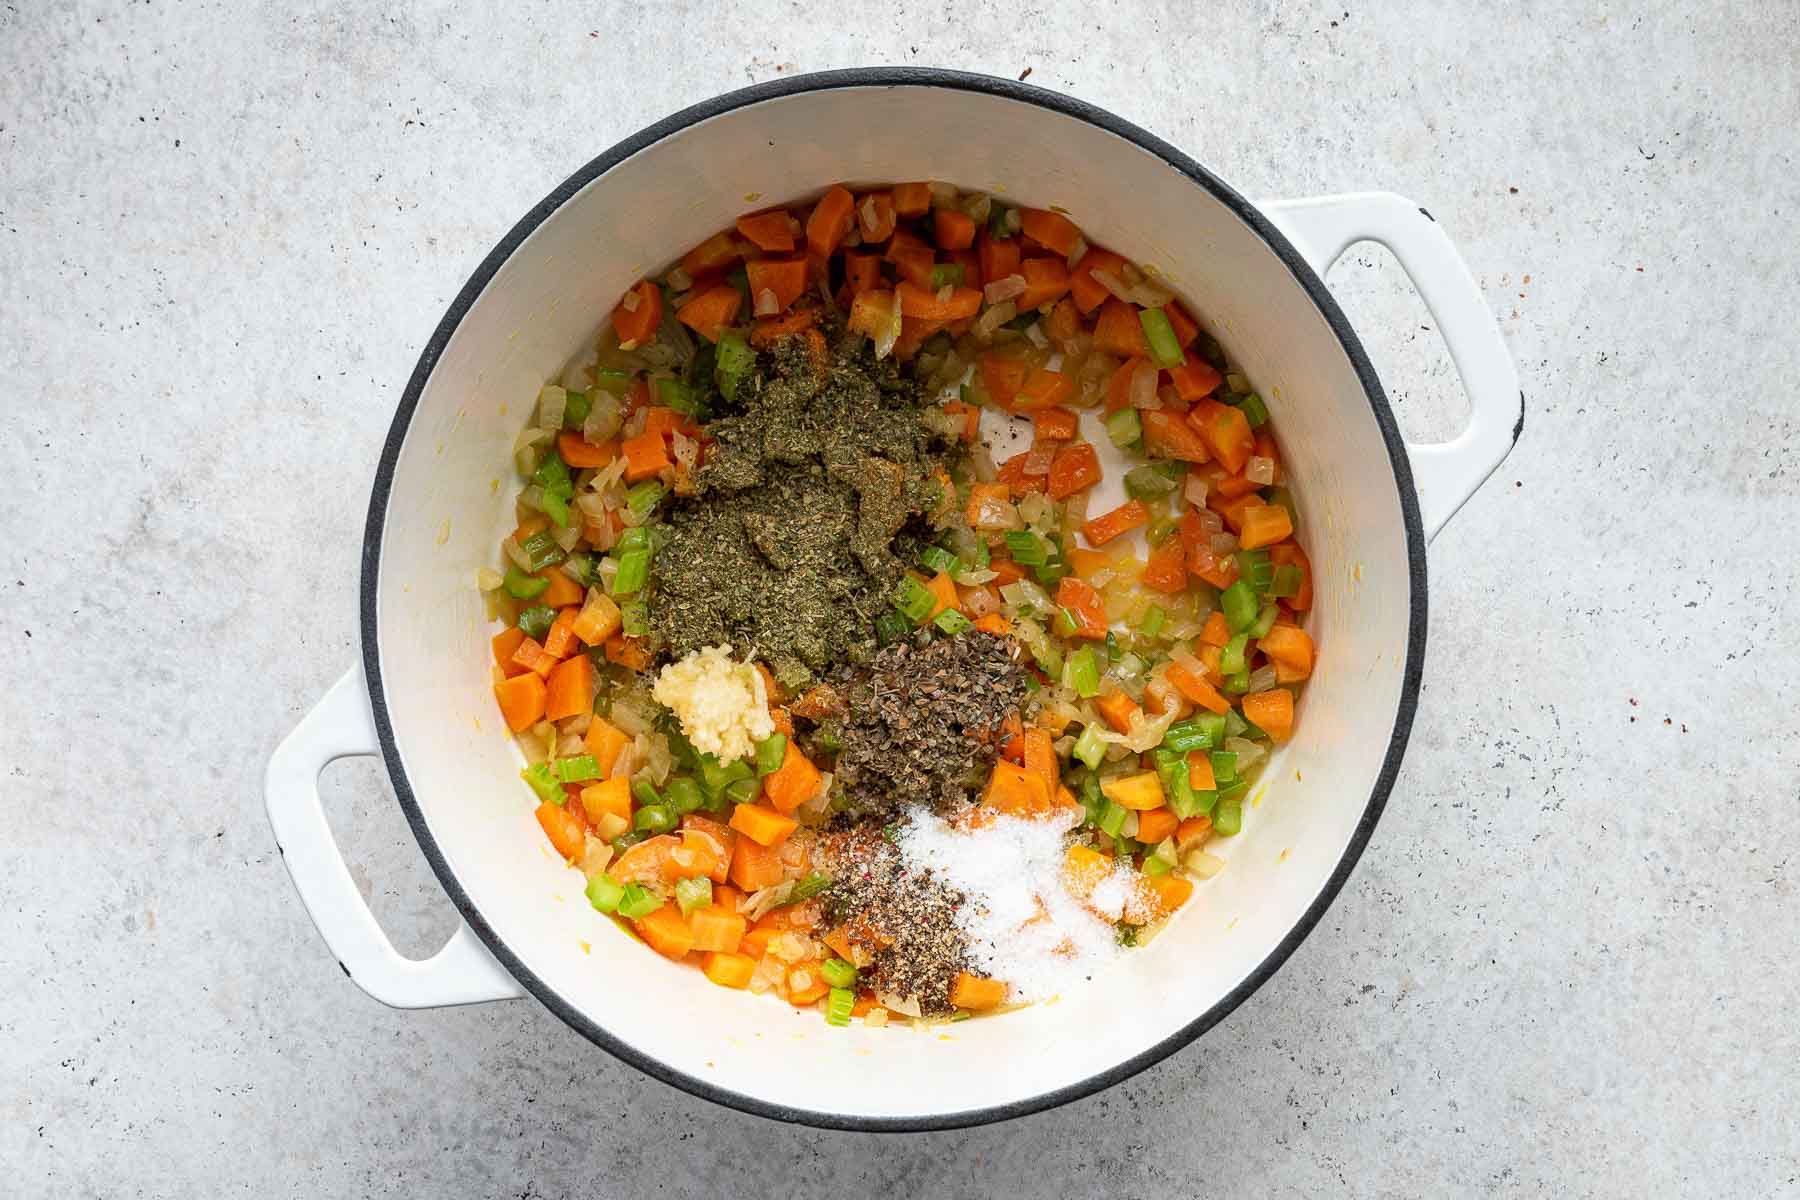 Dried herbs and spices on top of cooked vegetables in soup pot.